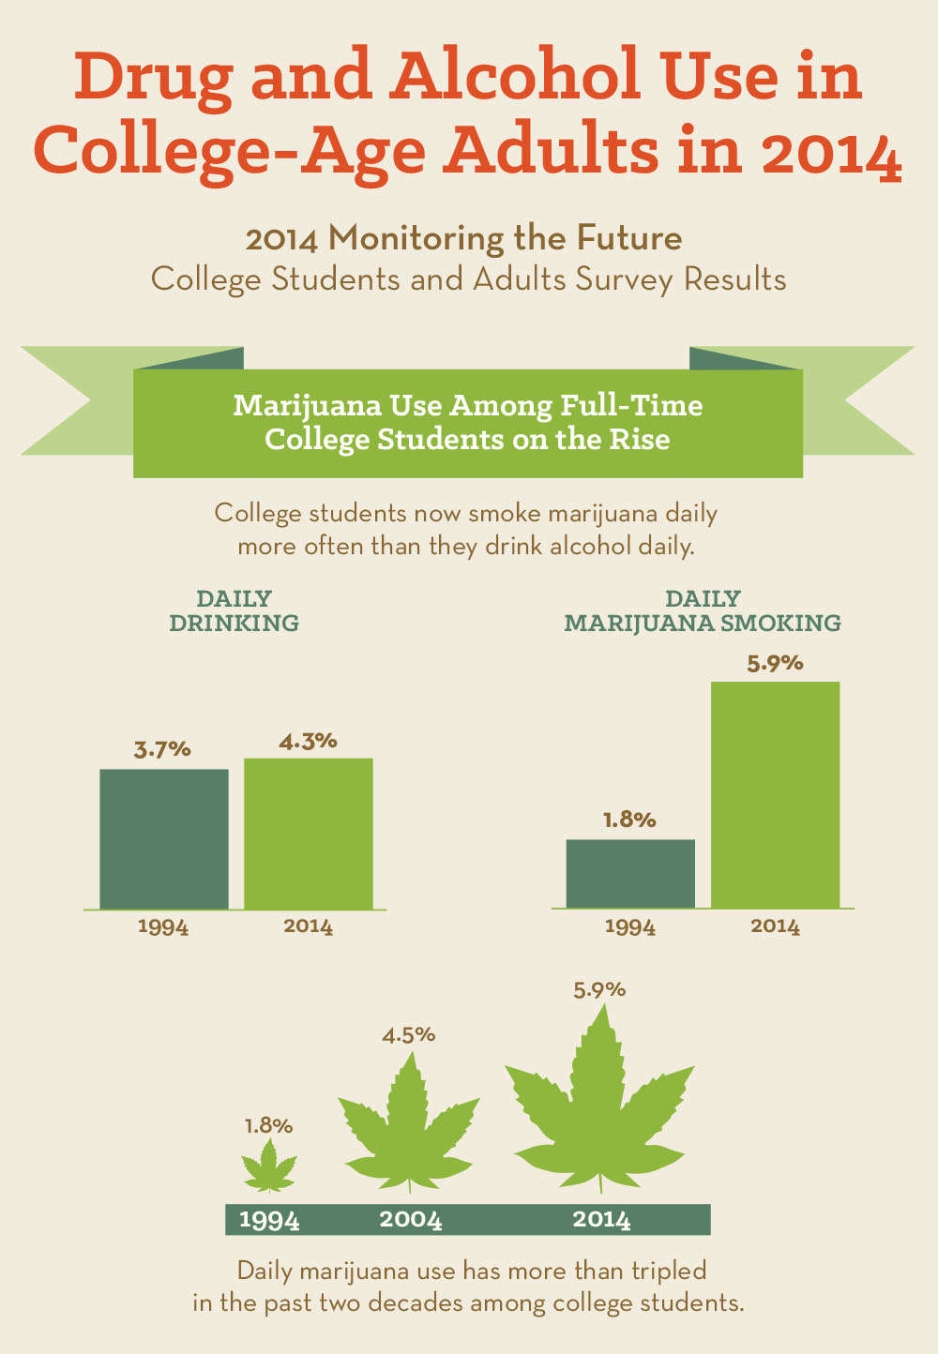 Marijuana Use Among Full-Time College Students on the Rise